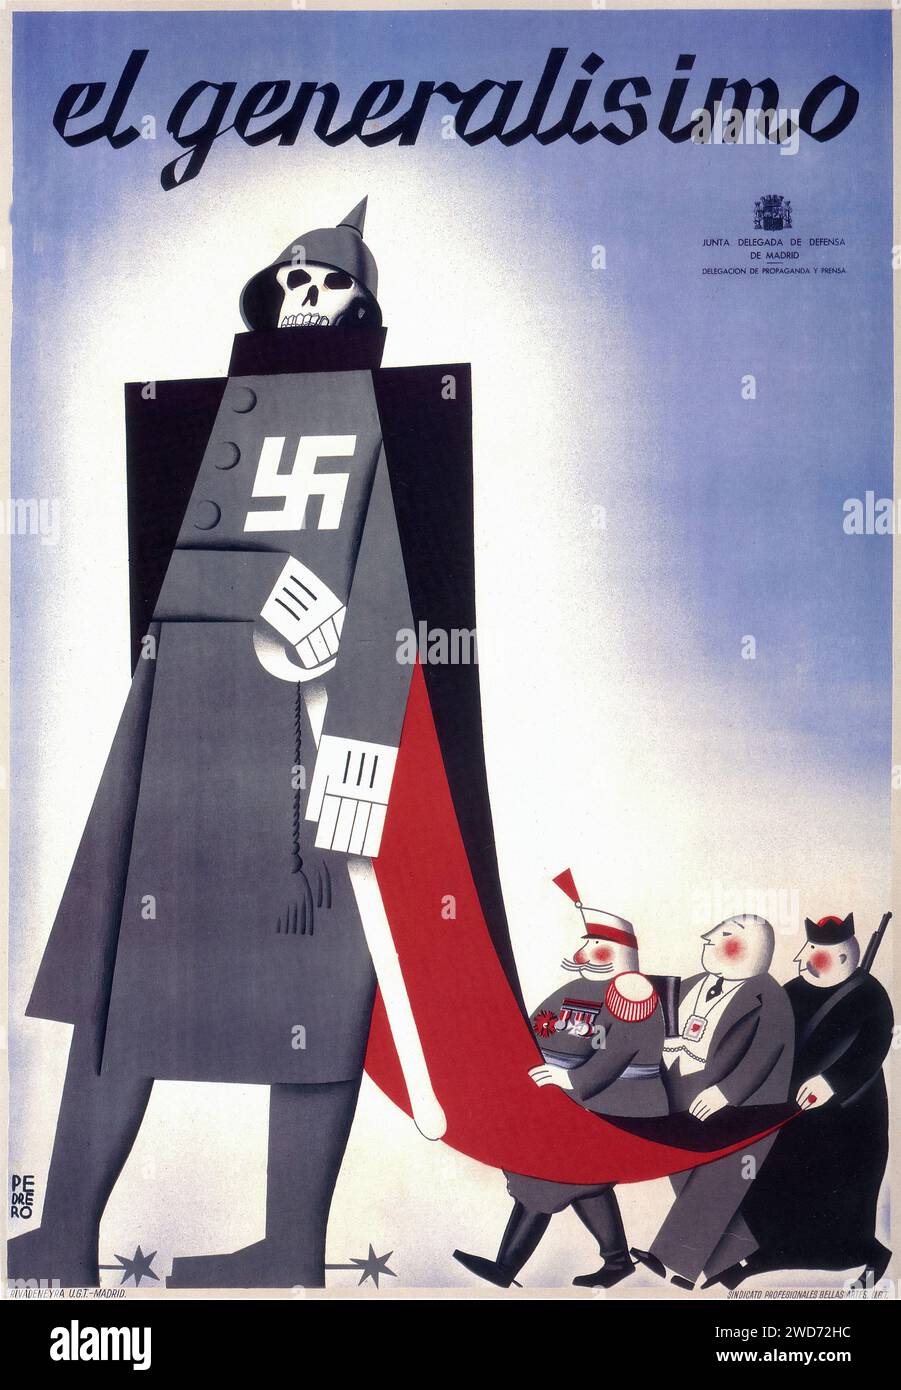 'el generalísimo' with a caricature of Franco and symbols of Nazi Germany A satirical portrayal of Franco as a puppet master controlling smaller figures, with a menacing skull and swastikas, critiquing his association with Nazi Germany  - Spanish Civil War (Guerra Civil Española) Propaganda Poster Stock Photo